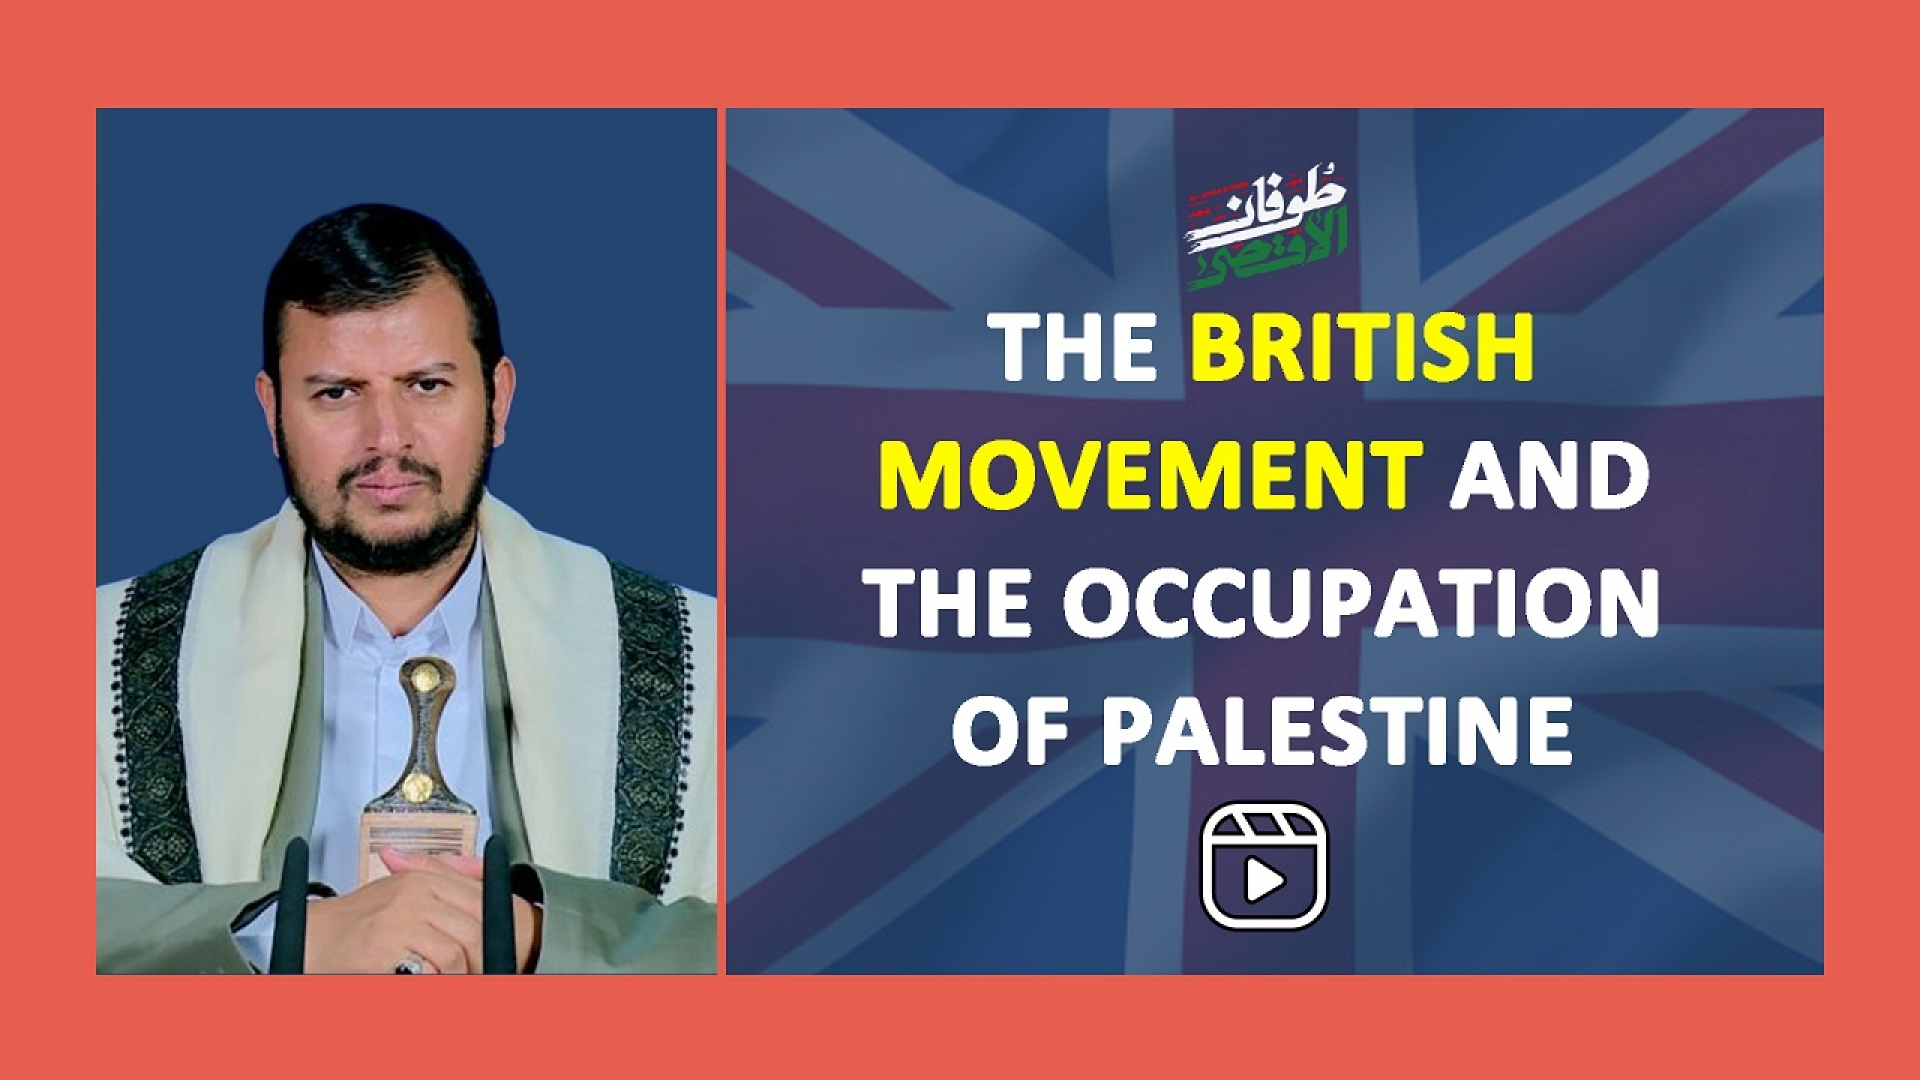 The British Movement and the Occupation of Palestine | #status #reels #shorts | Arabic Sub English